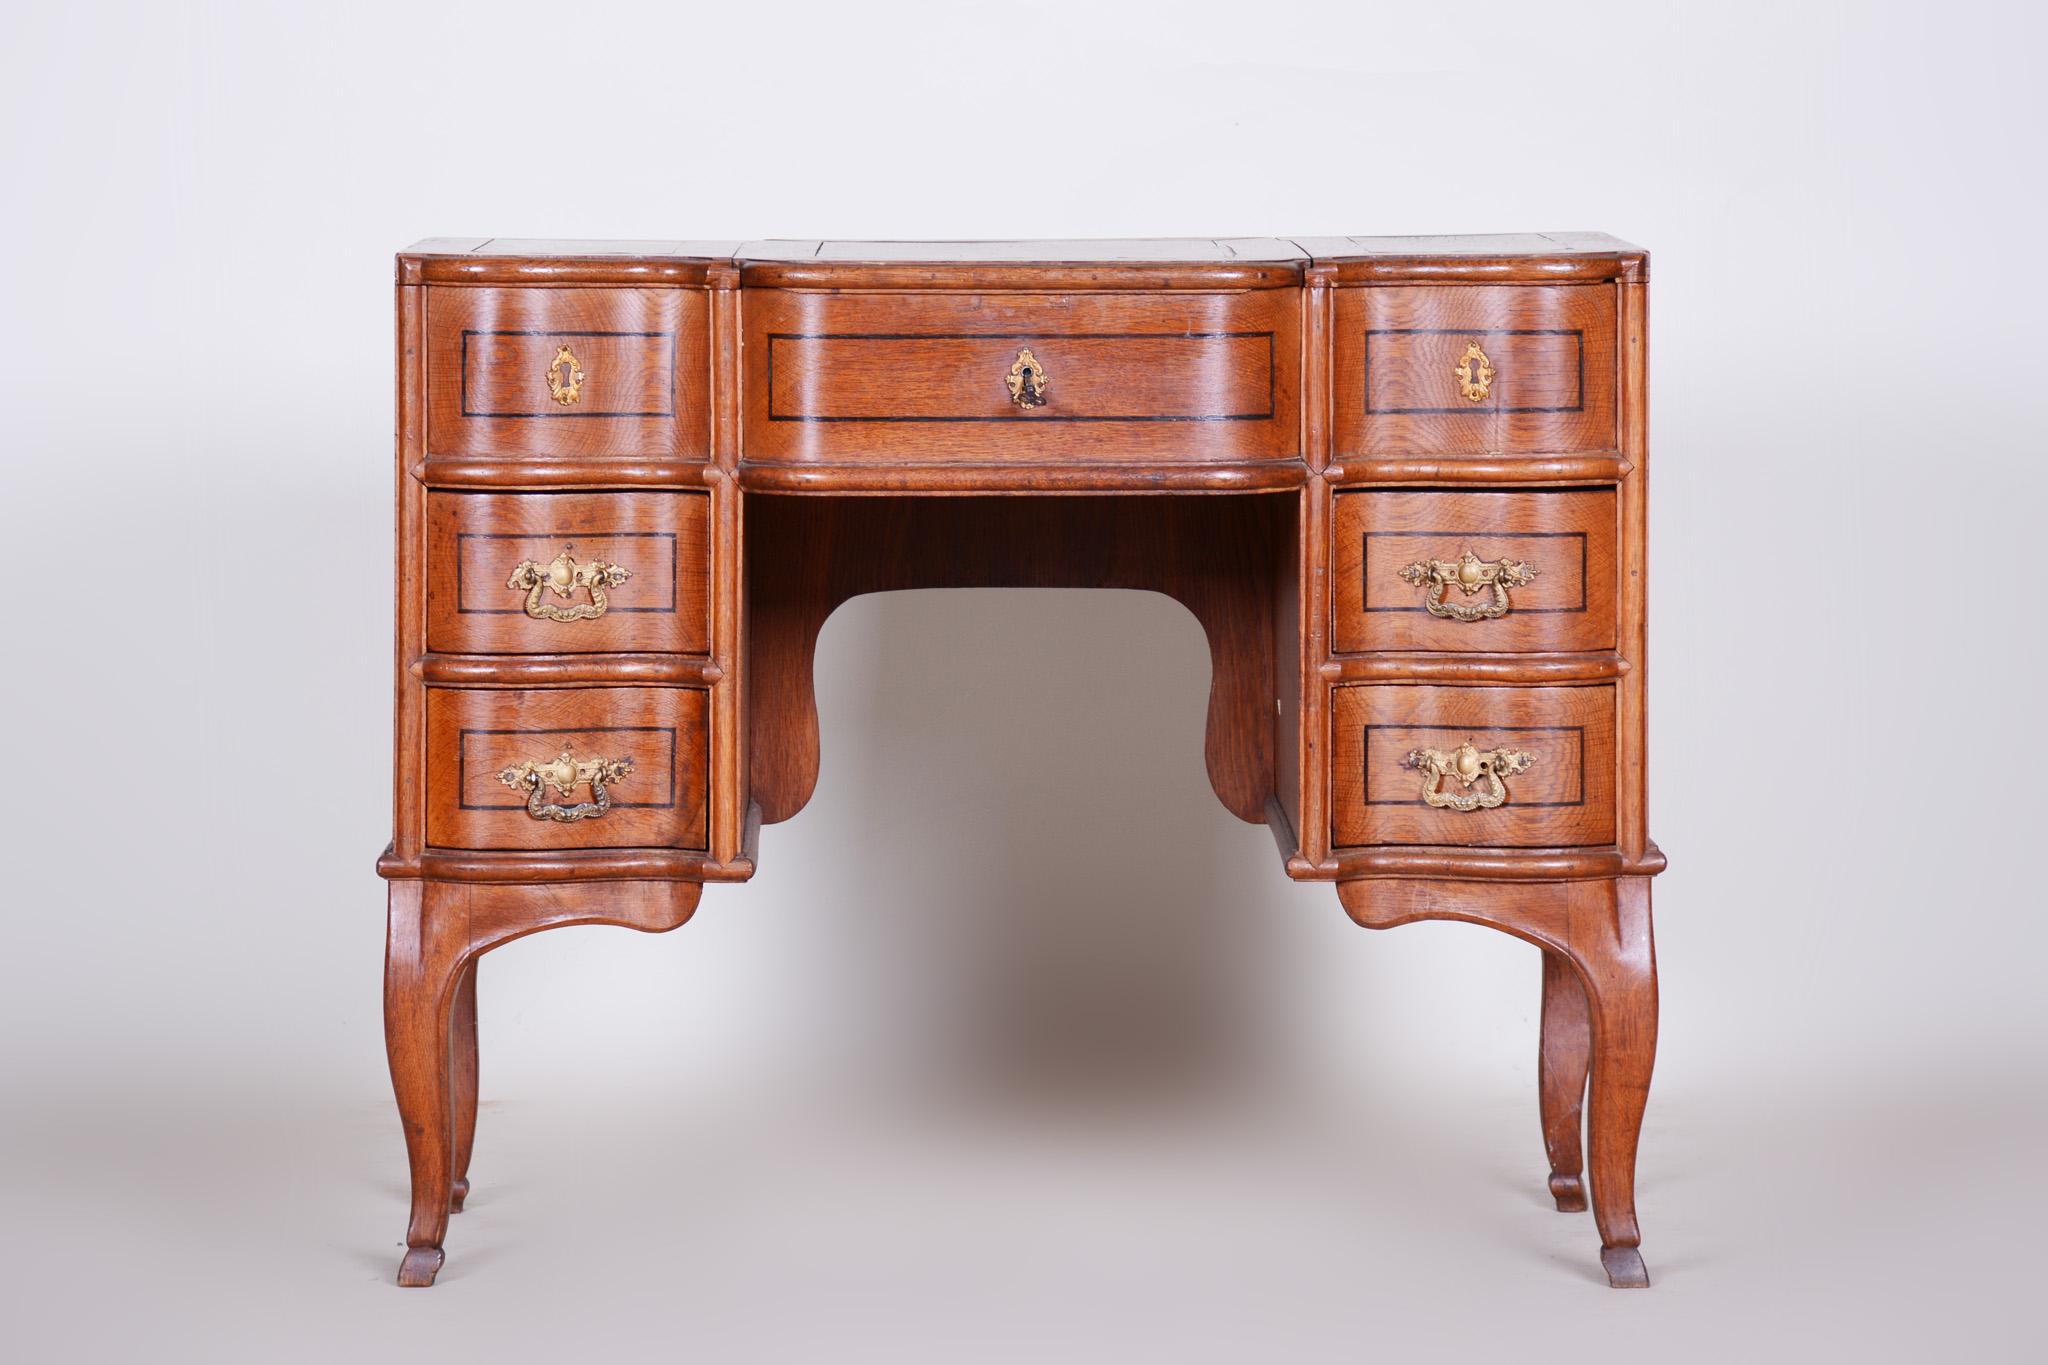 Biedermeier writing desk
Original very well reserved condition
Material: Oak veneer, lacquer
Period: 1820-1829
Unique pieces.

Measures: Height: 78 cm (30.7 in)
Height with mirror: 128 cm (50.4 in)
Width: 91 cm (35.8 in)
Depth: 51 cm (20.1